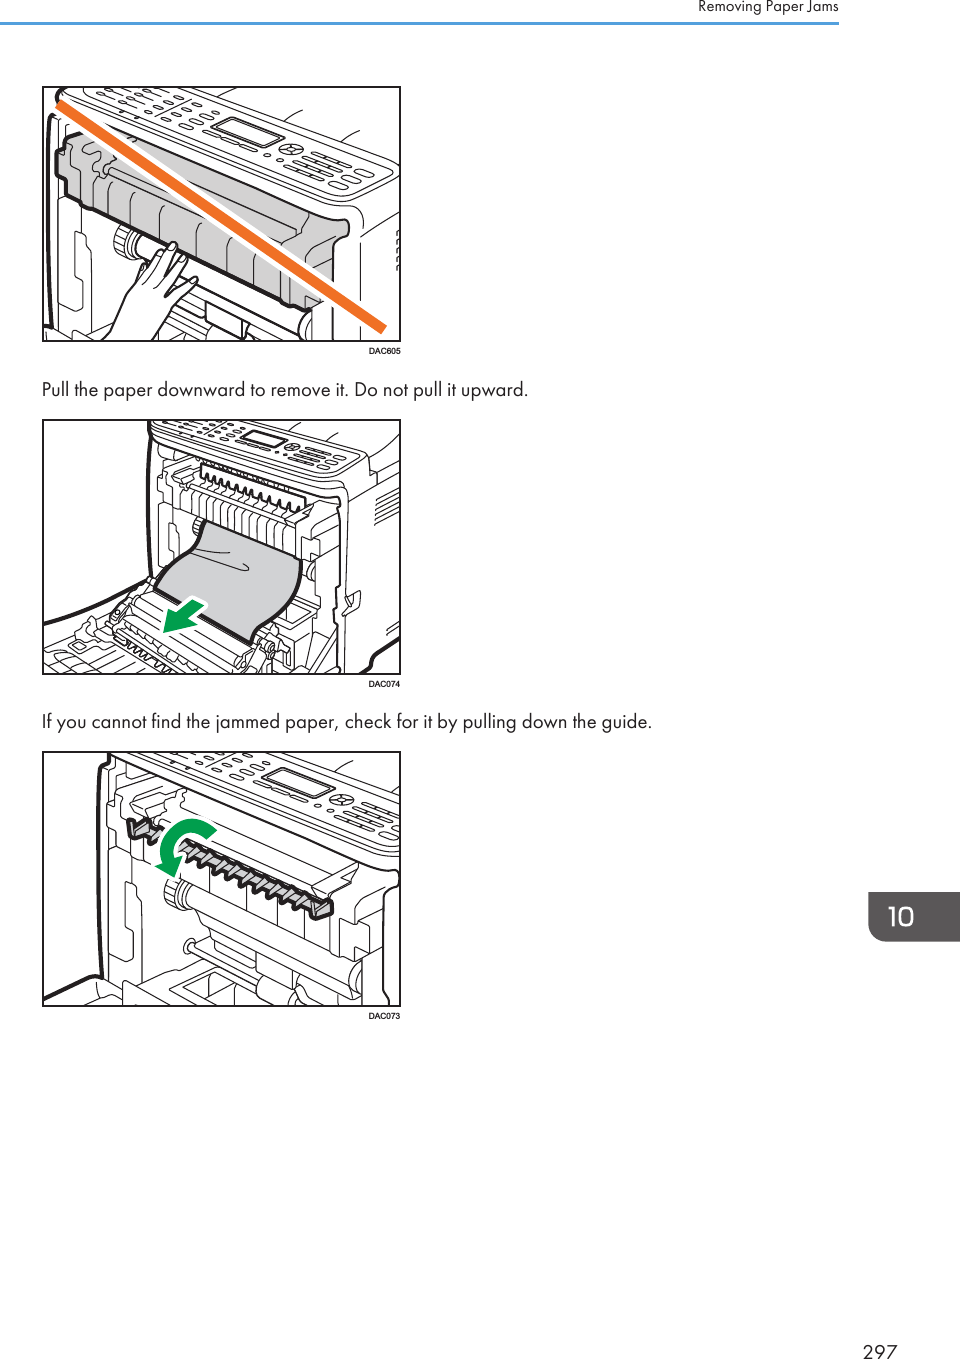 DAC605Pull the paper downward to remove it. Do not pull it upward.DAC074If you cannot find the jammed paper, check for it by pulling down the guide.DAC073Removing Paper Jams297